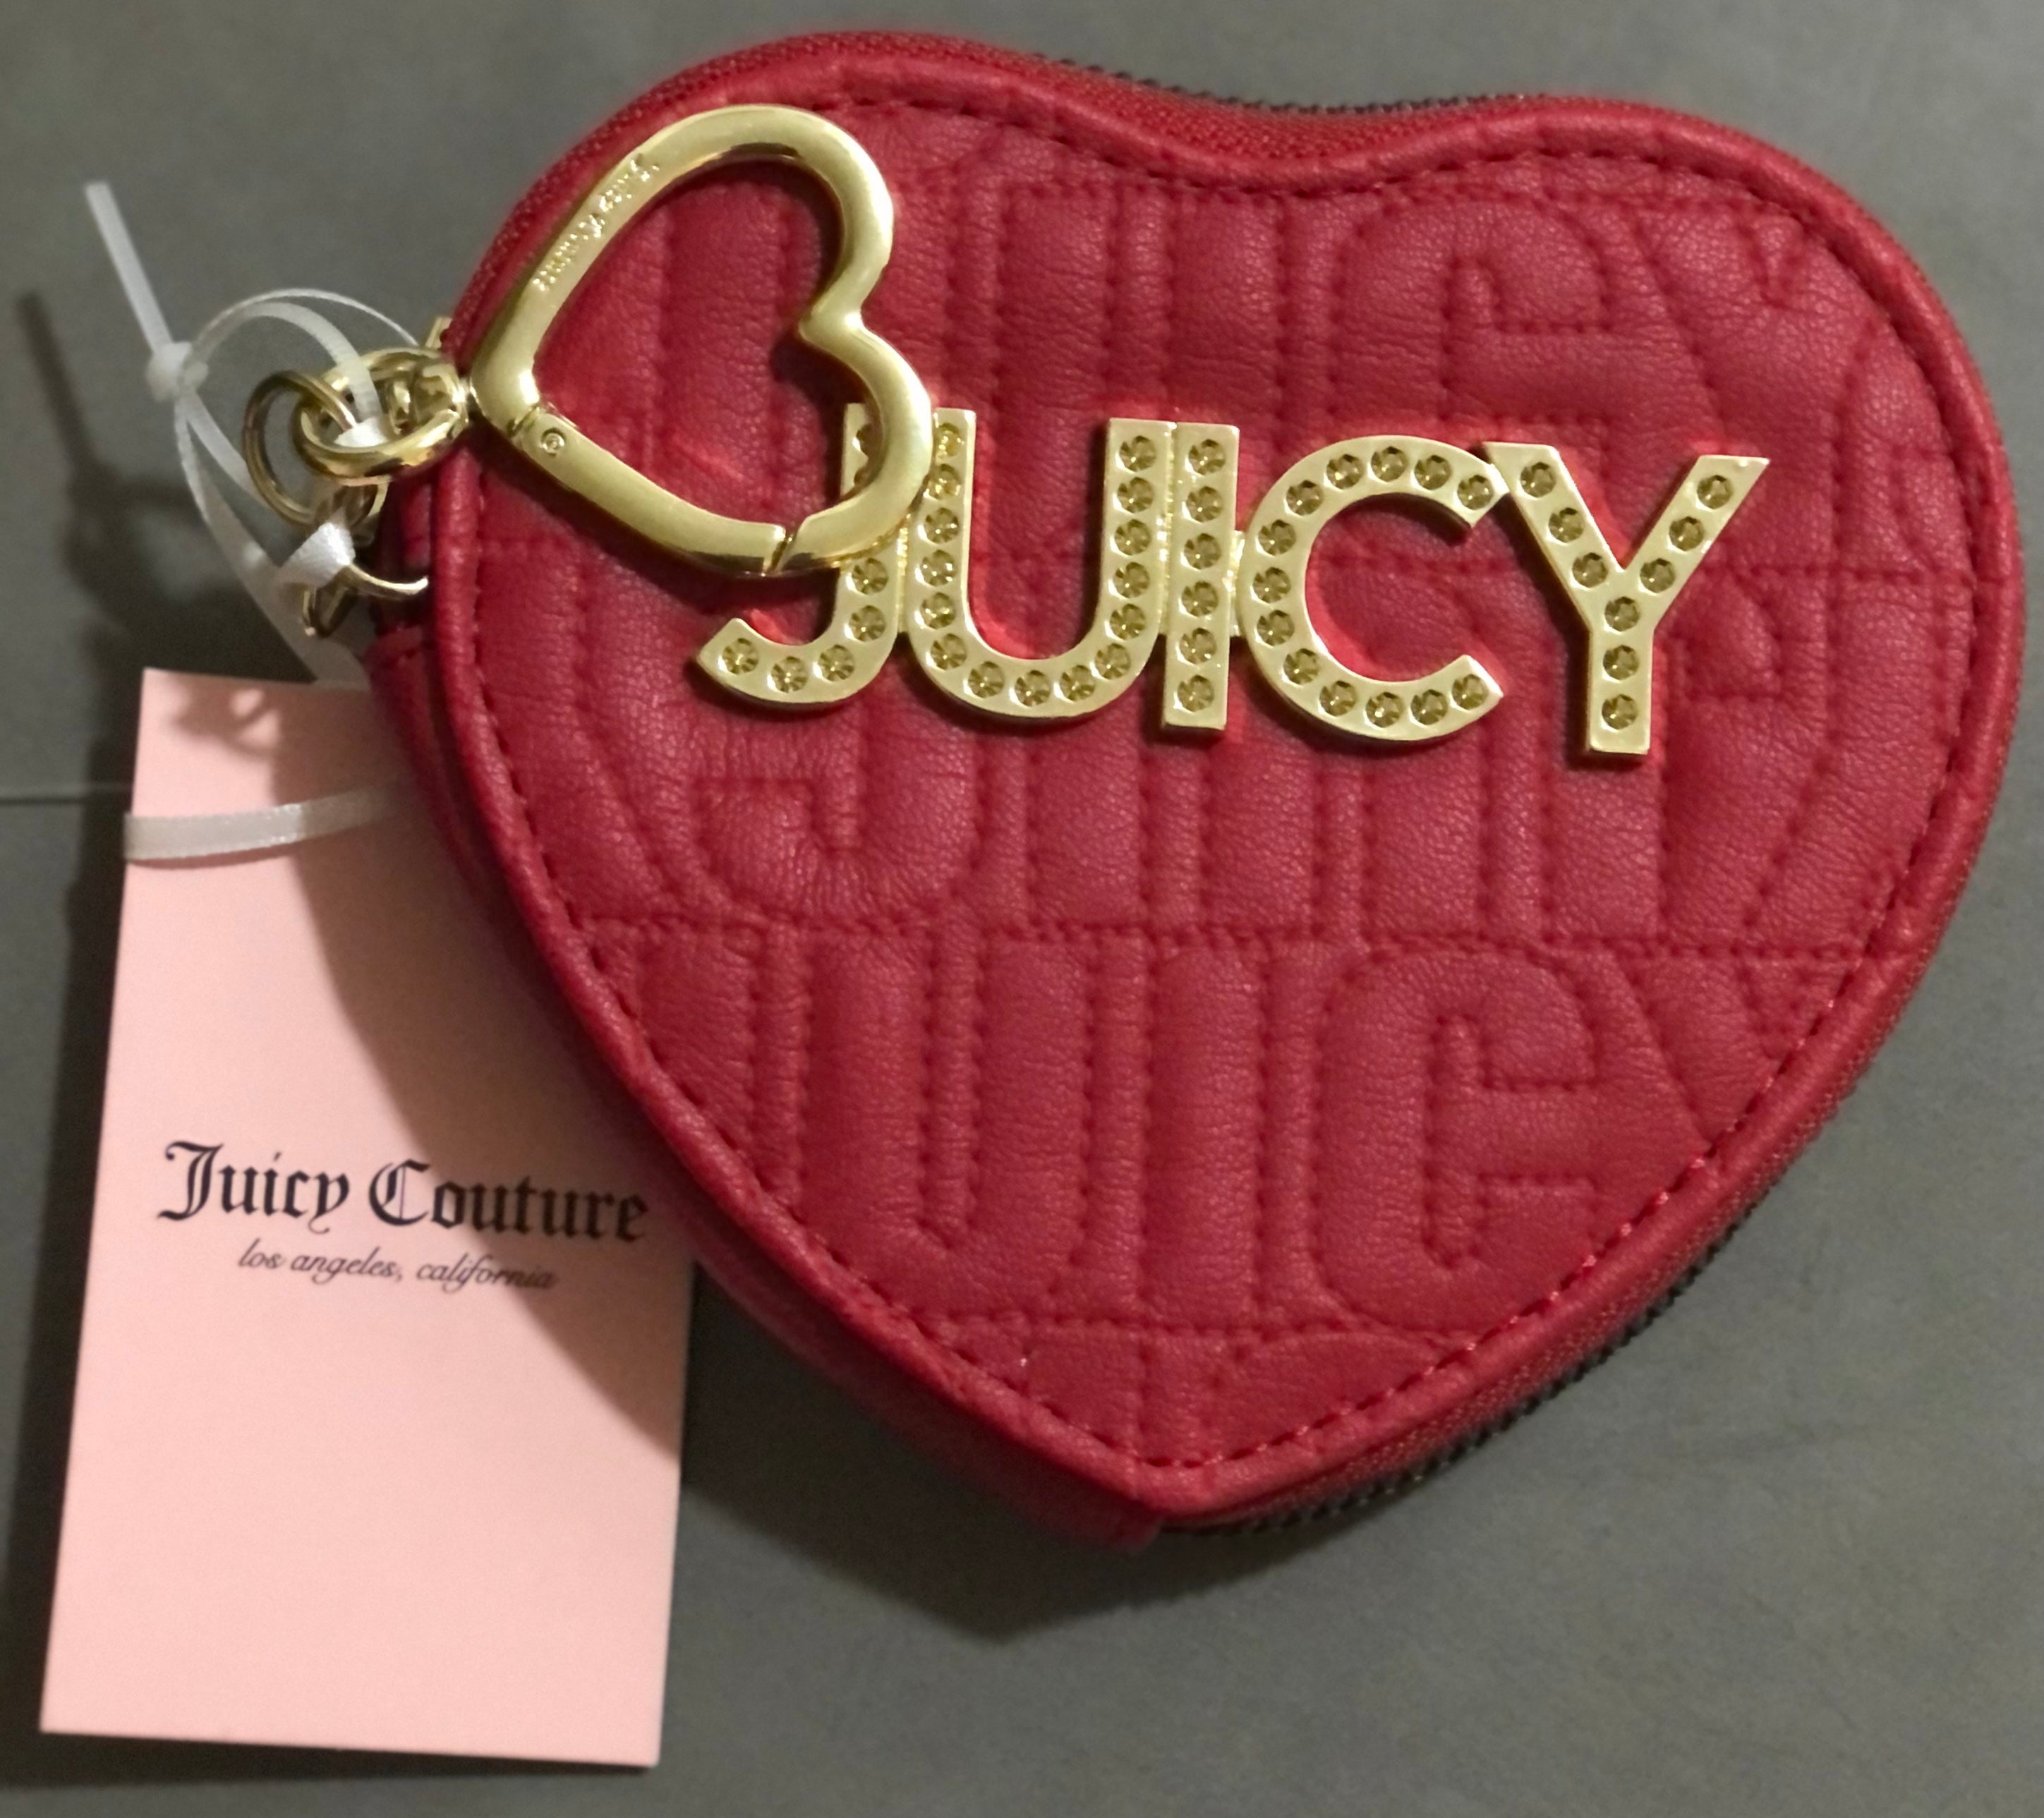 Juicy Couture Boxed dusty blush mini tote and barrel coin purse gift set  NIB Pink - $85 New With Tags - From Refashionista